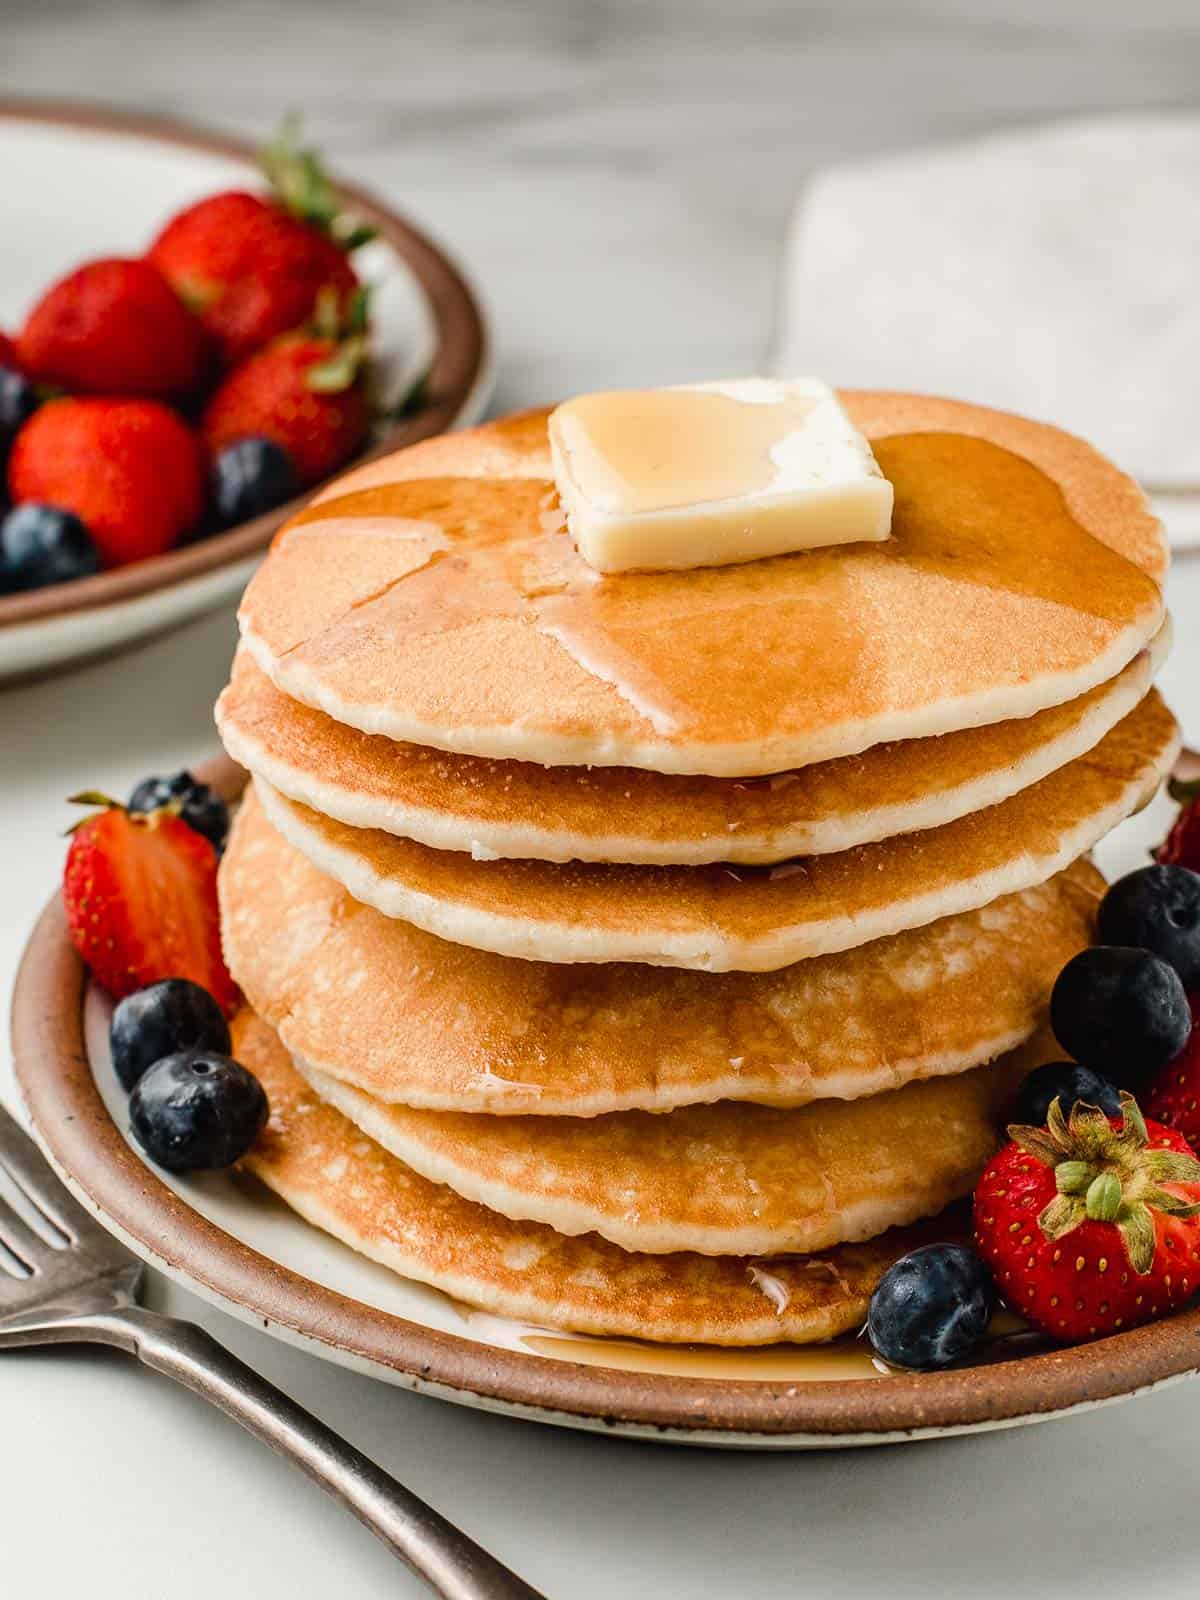 Stack of sourdough pancakes on a plate with berries.